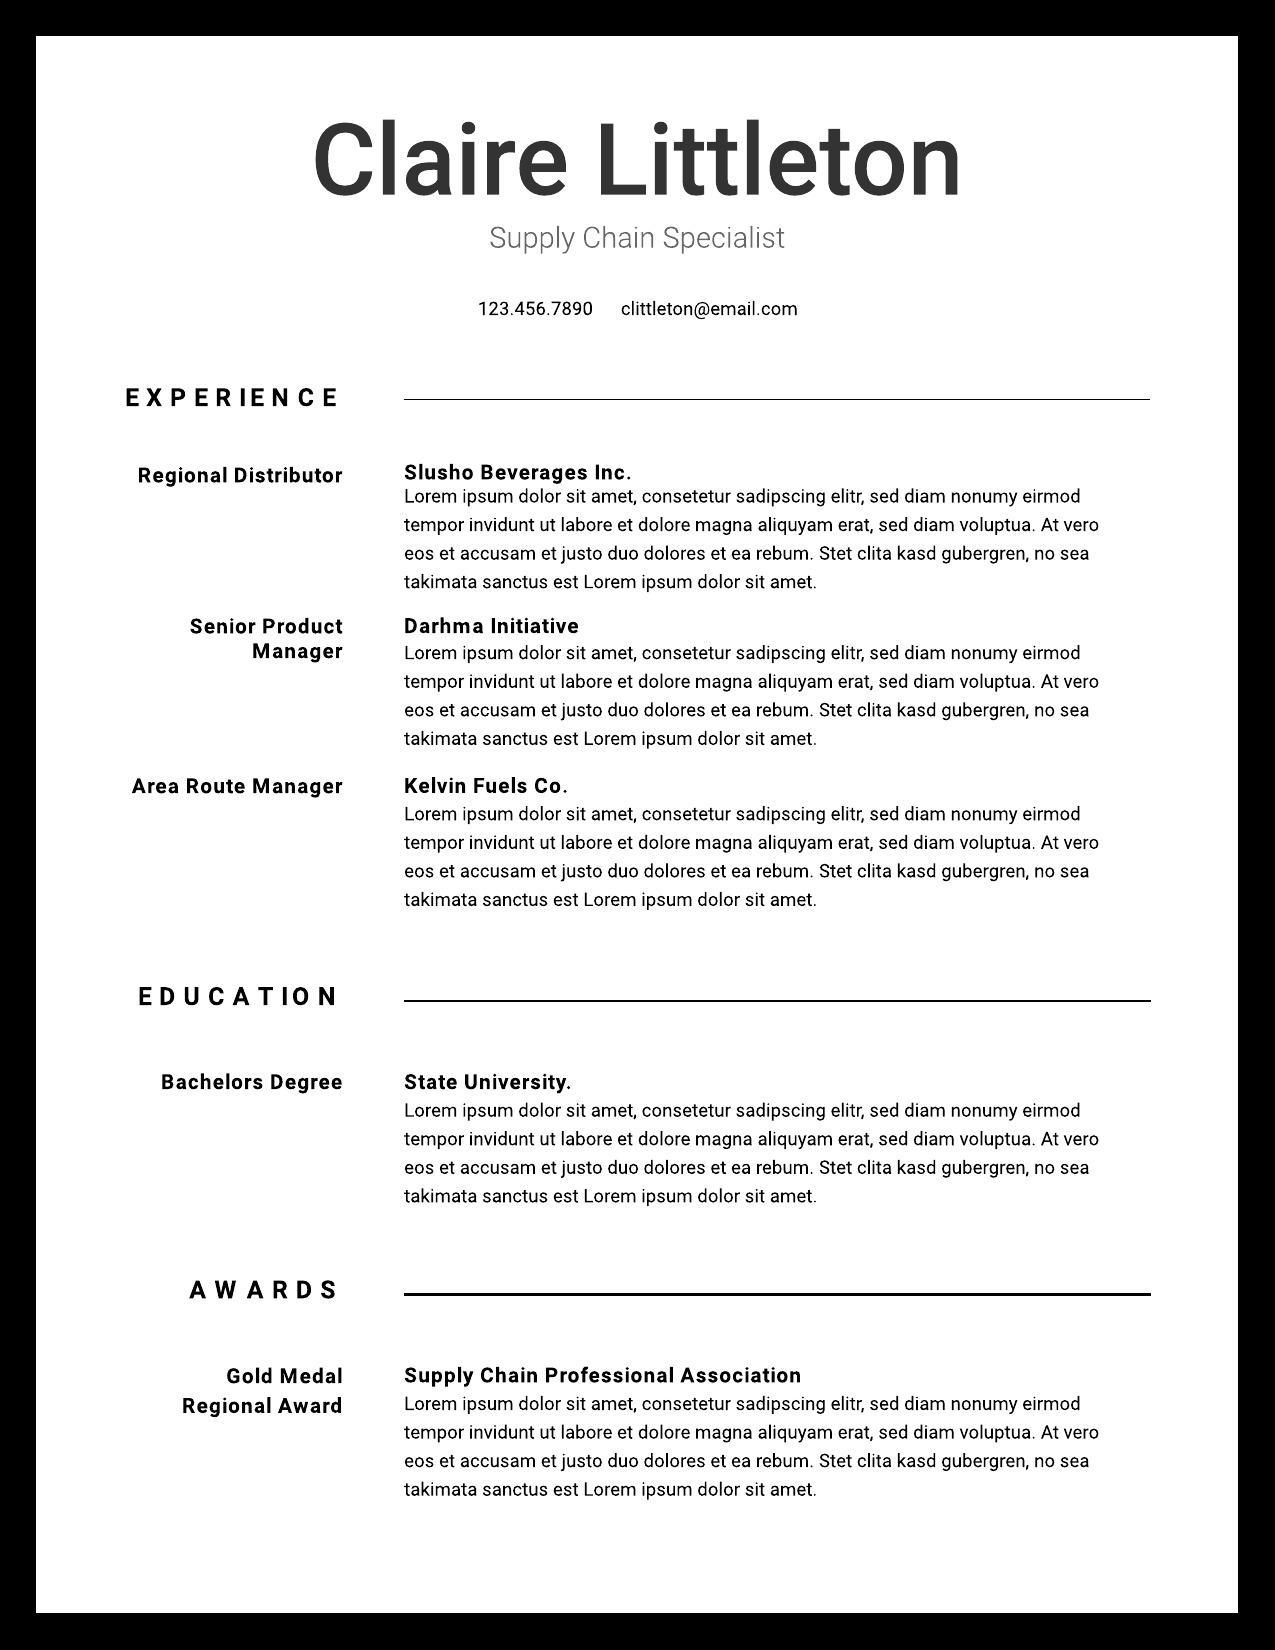 Resume Examples &  Writing Tips for 2021